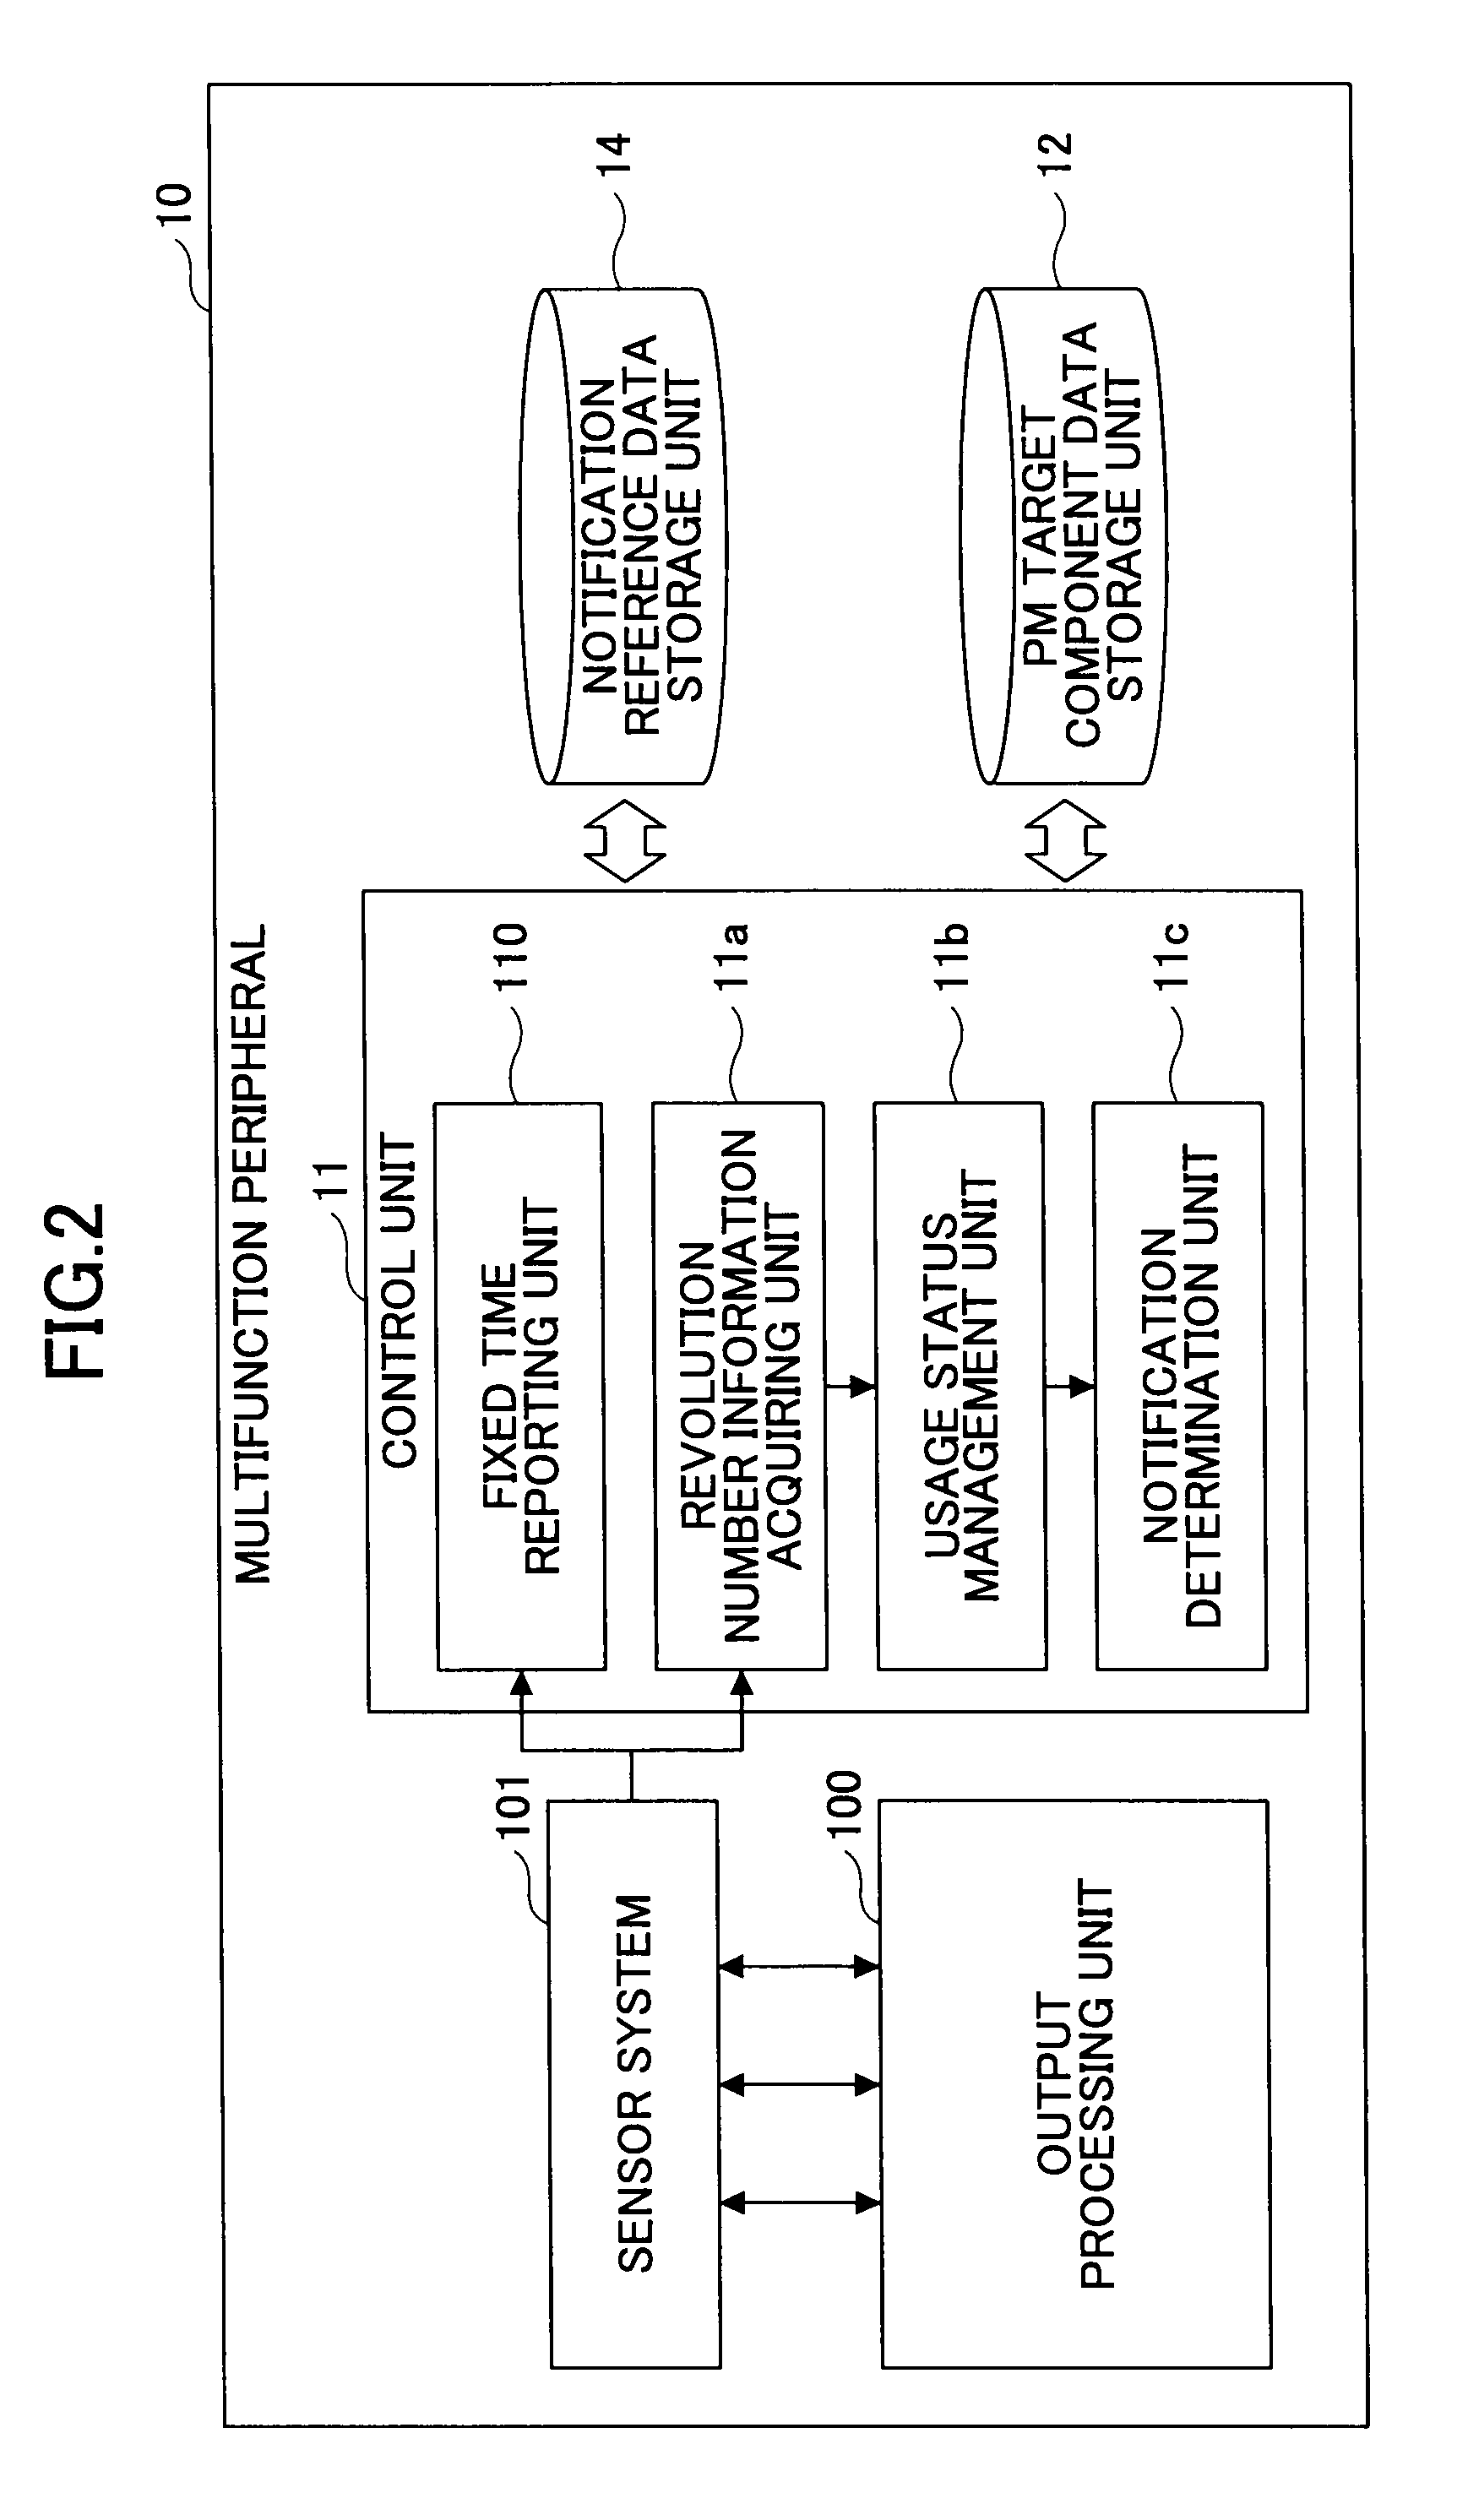 Maintenance management system and image forming apparatus